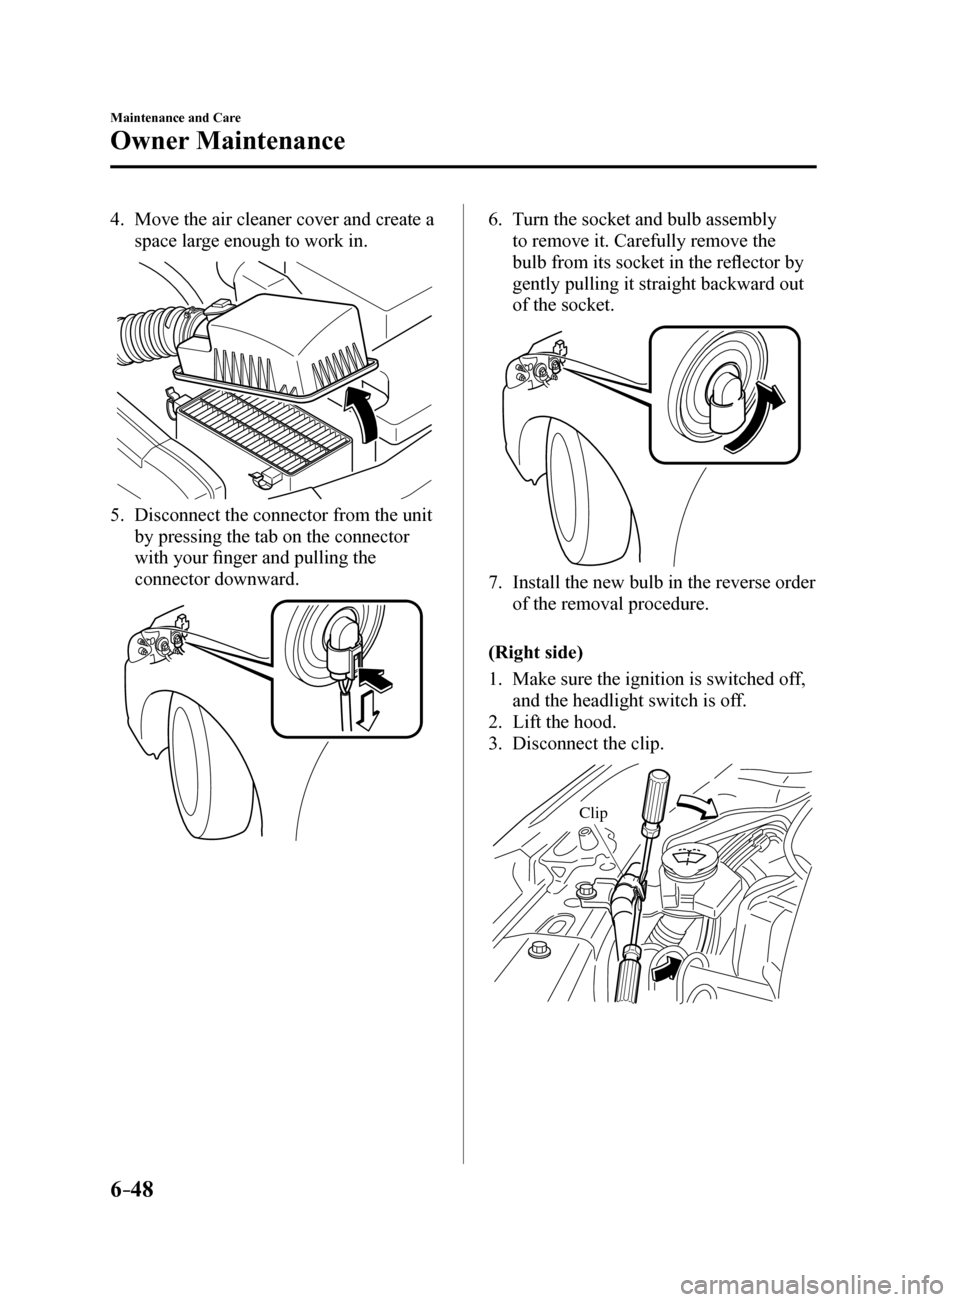 MAZDA MODEL 6 2017  Owners Manual (in English) 6–48
Maintenance and Care
Owner Maintenance
4. Move the air cleaner cover and create a 
space large enough to work in.
5. Disconnect the connector from the unit 
by pressing the tab on the connector